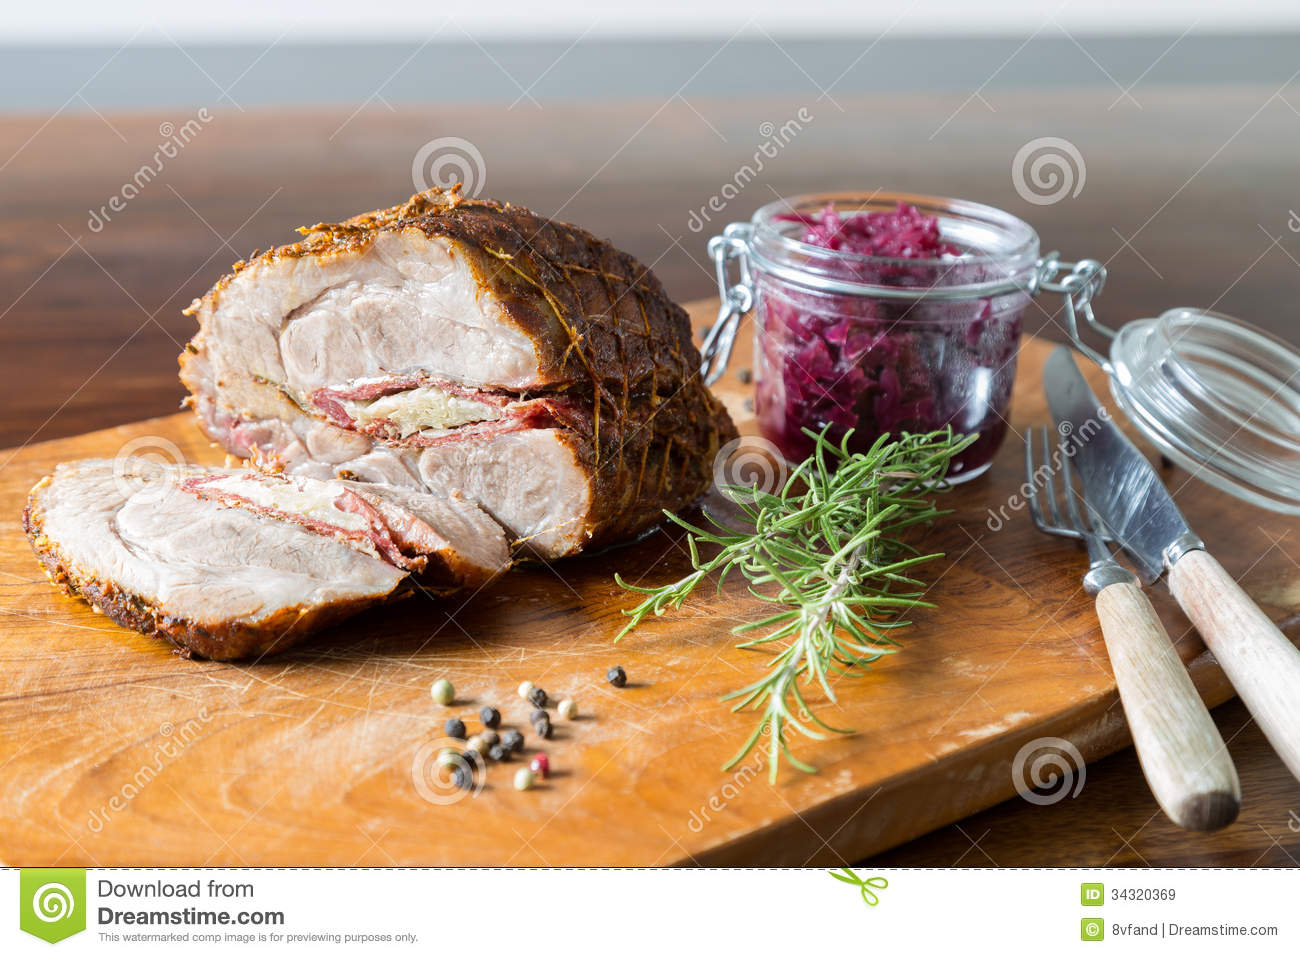 Spit Roast With Red Cabbage Royalty Free Stock Images   Image